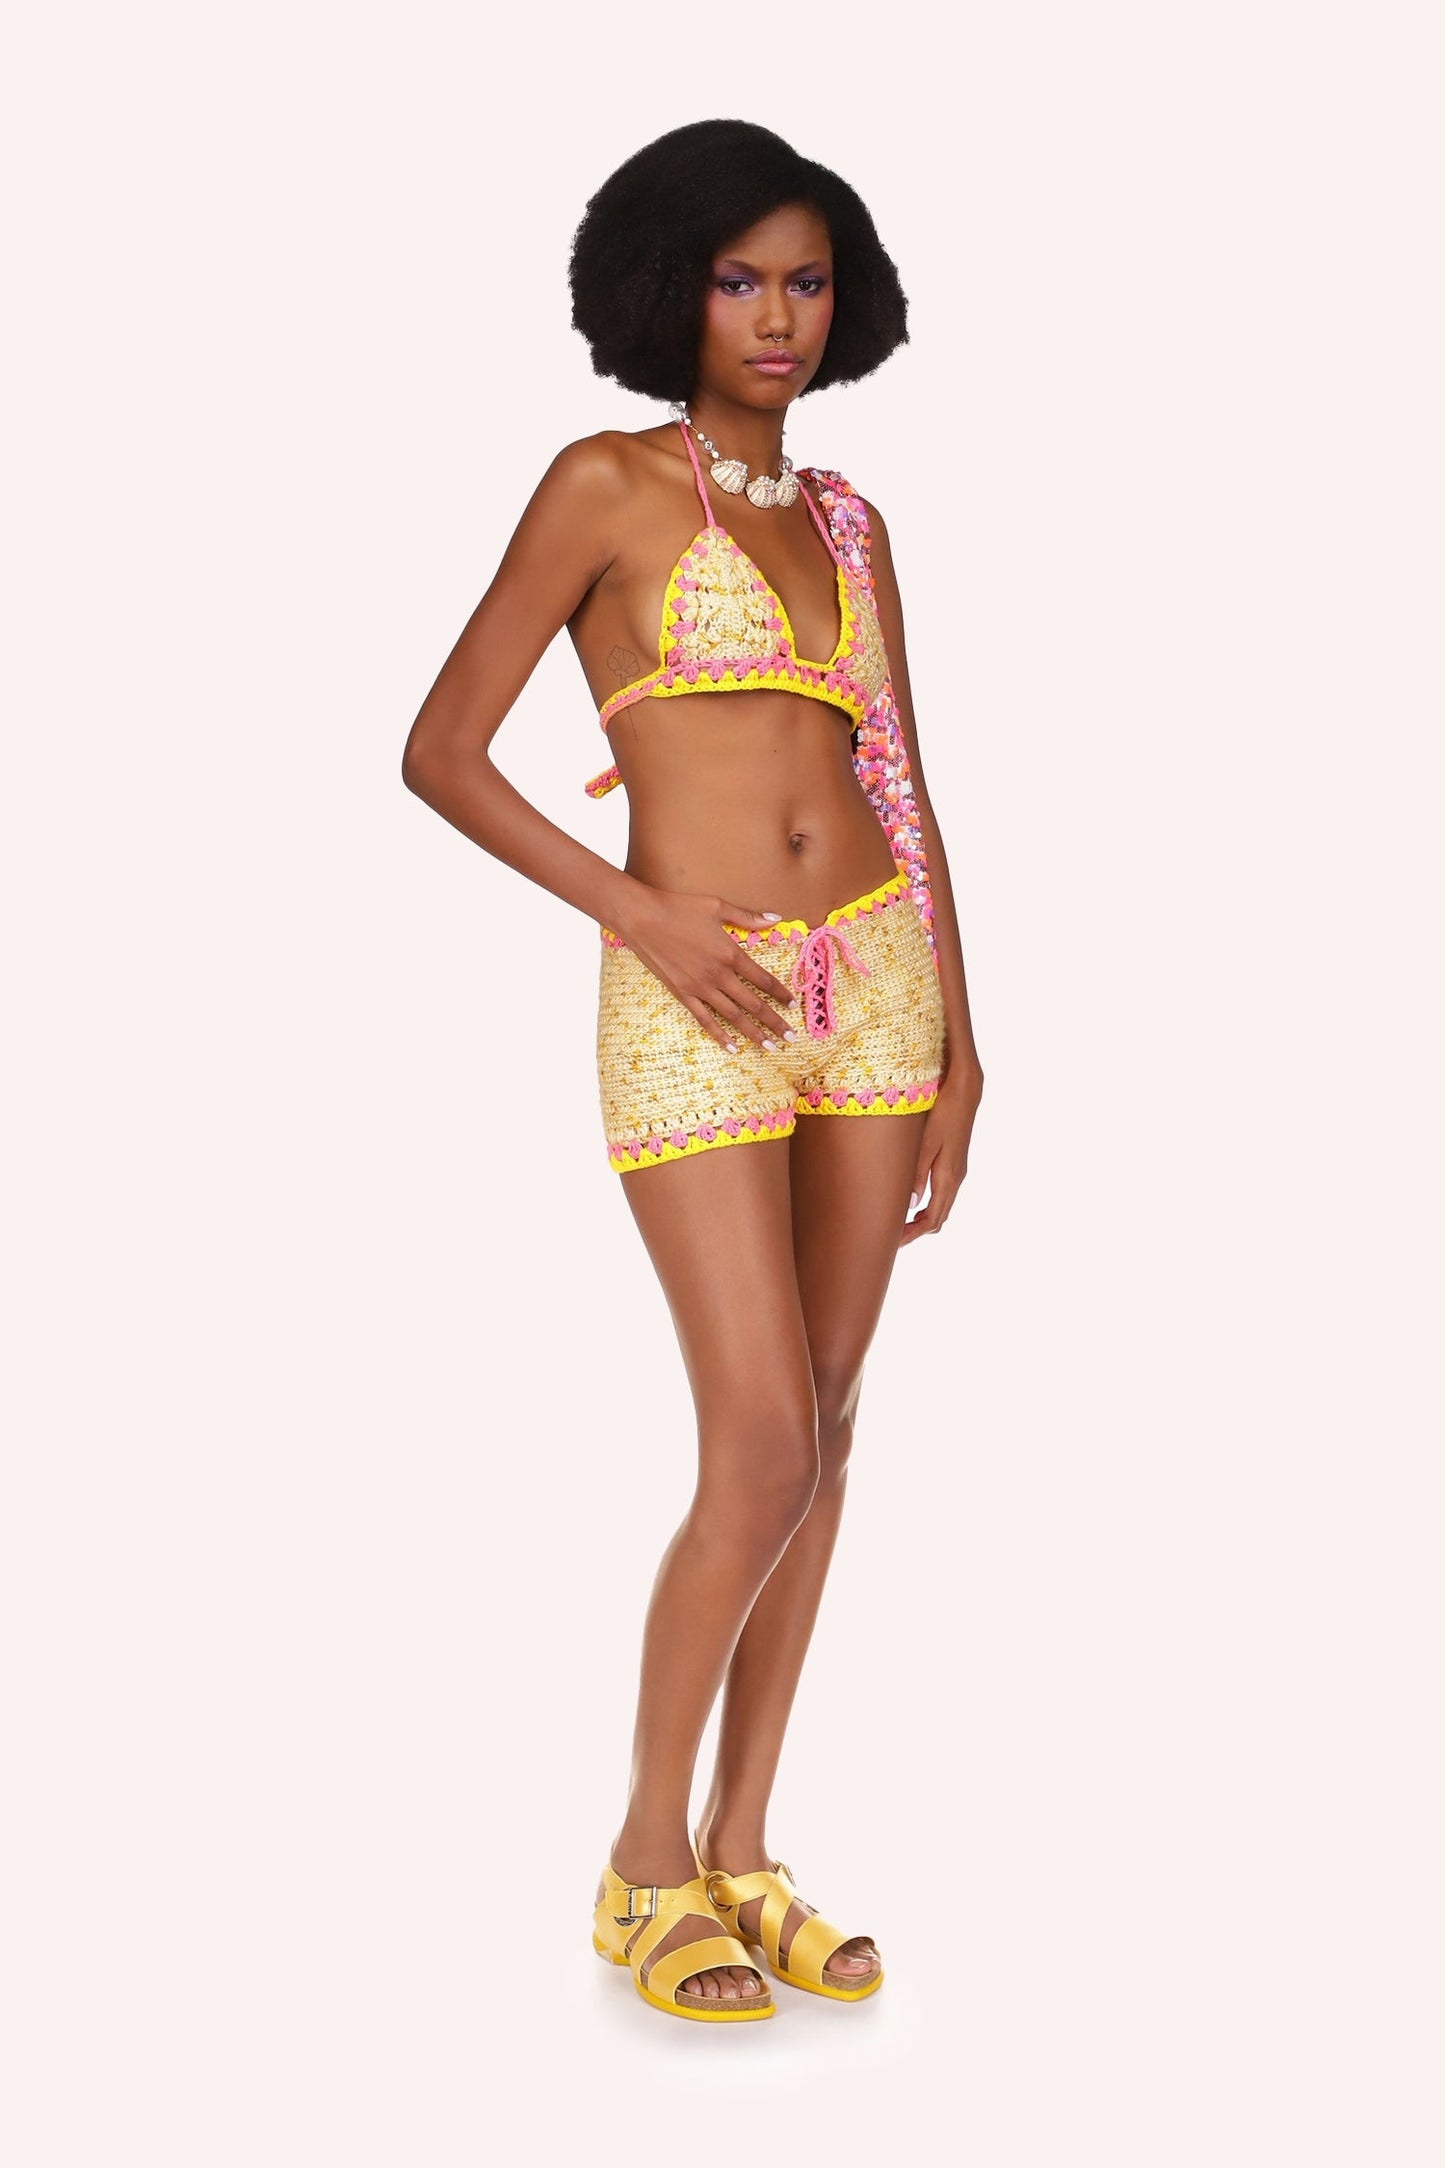 Main color of this Rivera Crochet Set is yellow with colored spots.